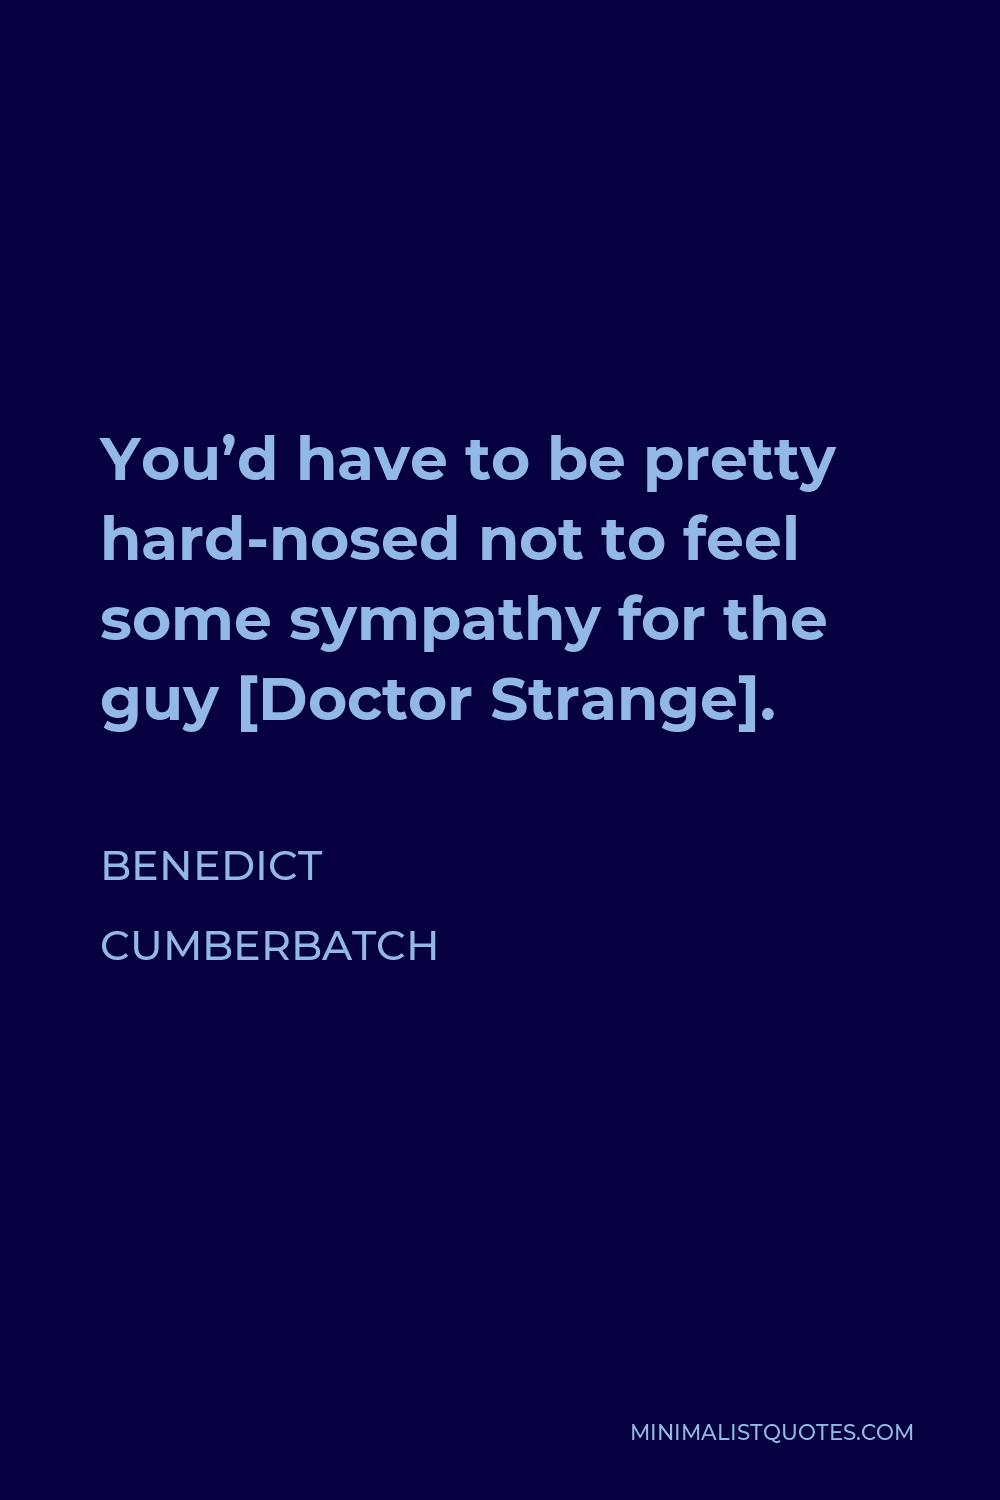 Benedict Cumberbatch Quote - You’d have to be pretty hard-nosed not to feel some sympathy for the guy [Doctor Strange].